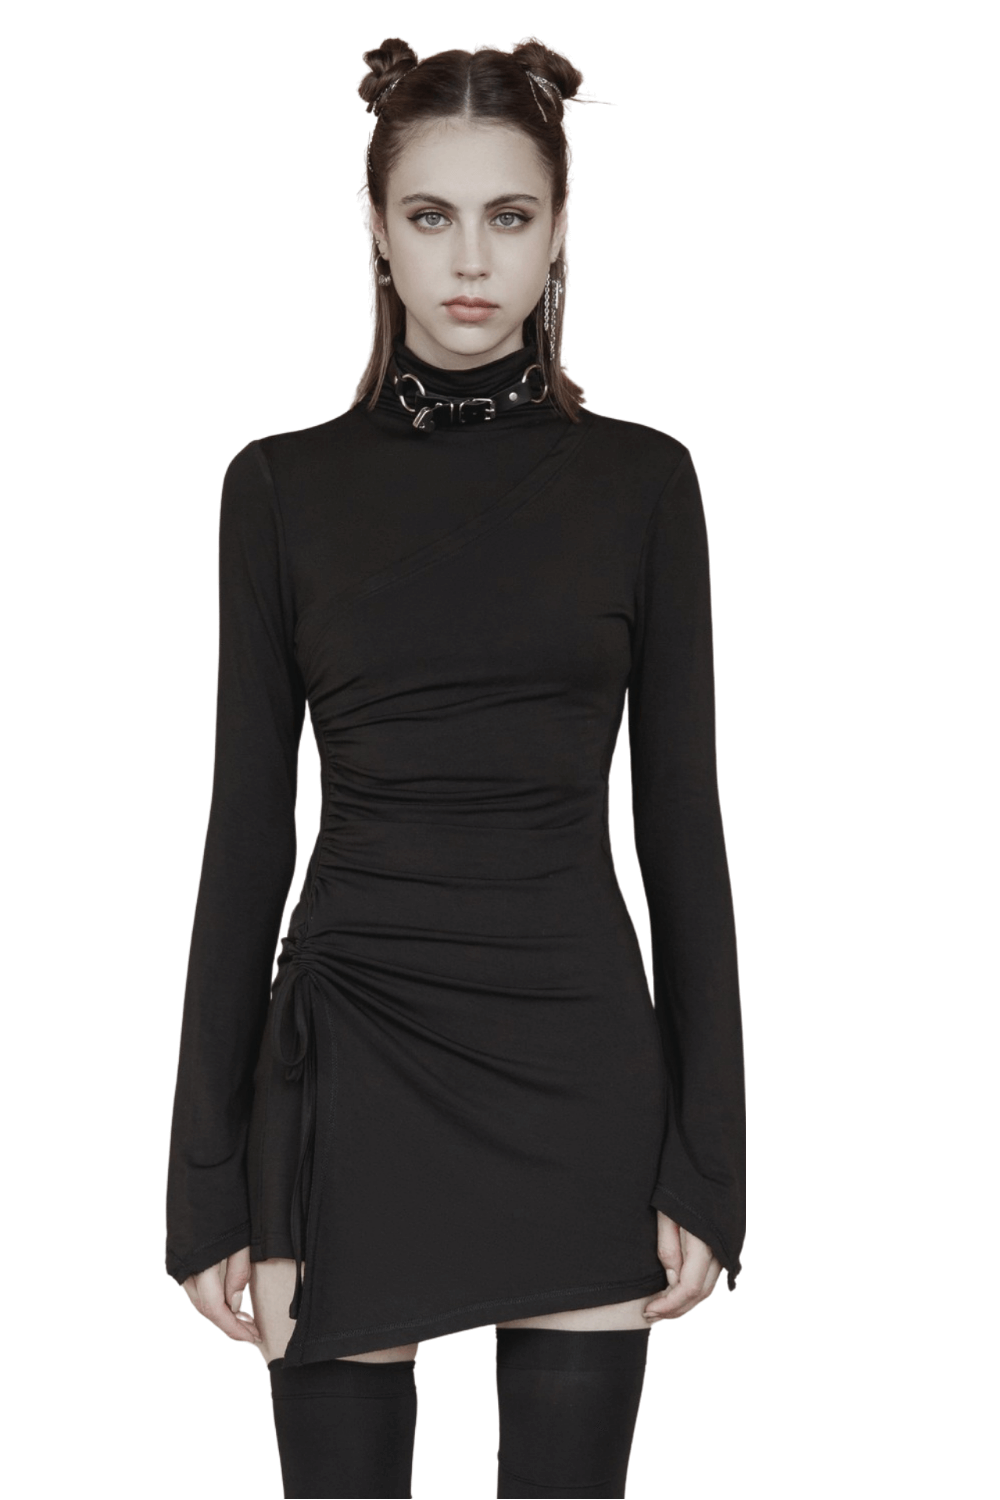 Black Turtleneck Dress with Side Pleats and Tie Detail